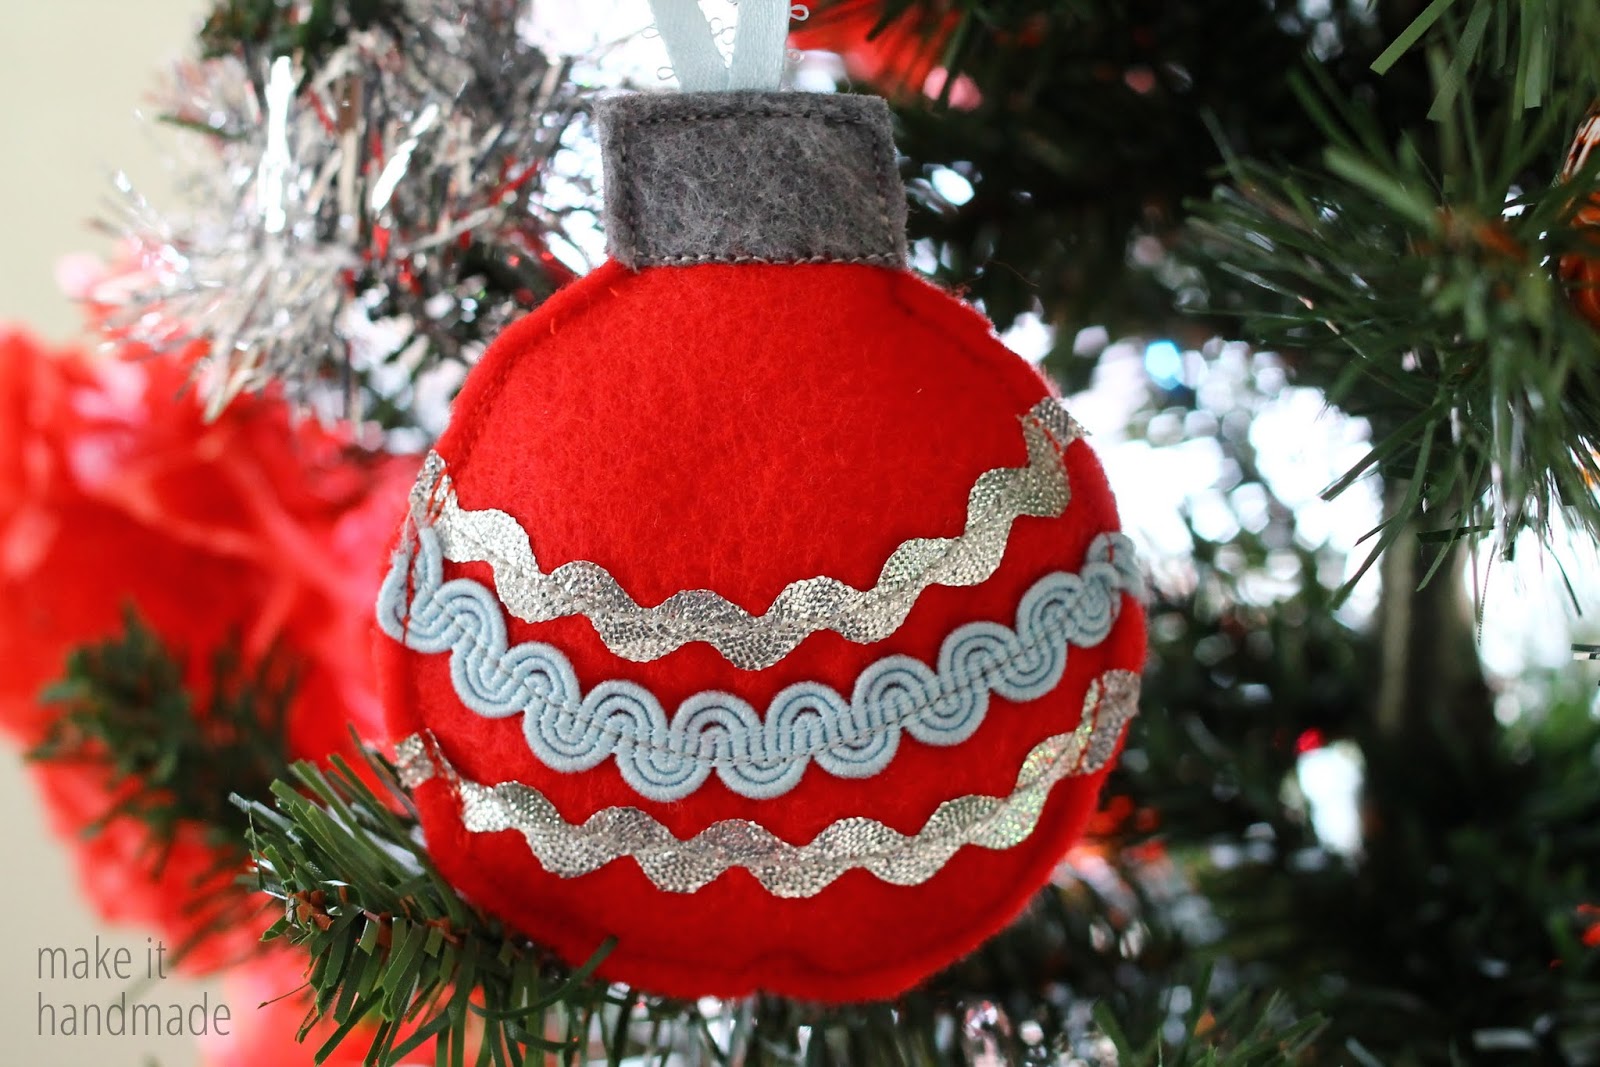 How to Make Felt Christmas Tree Ornaments From Scraps